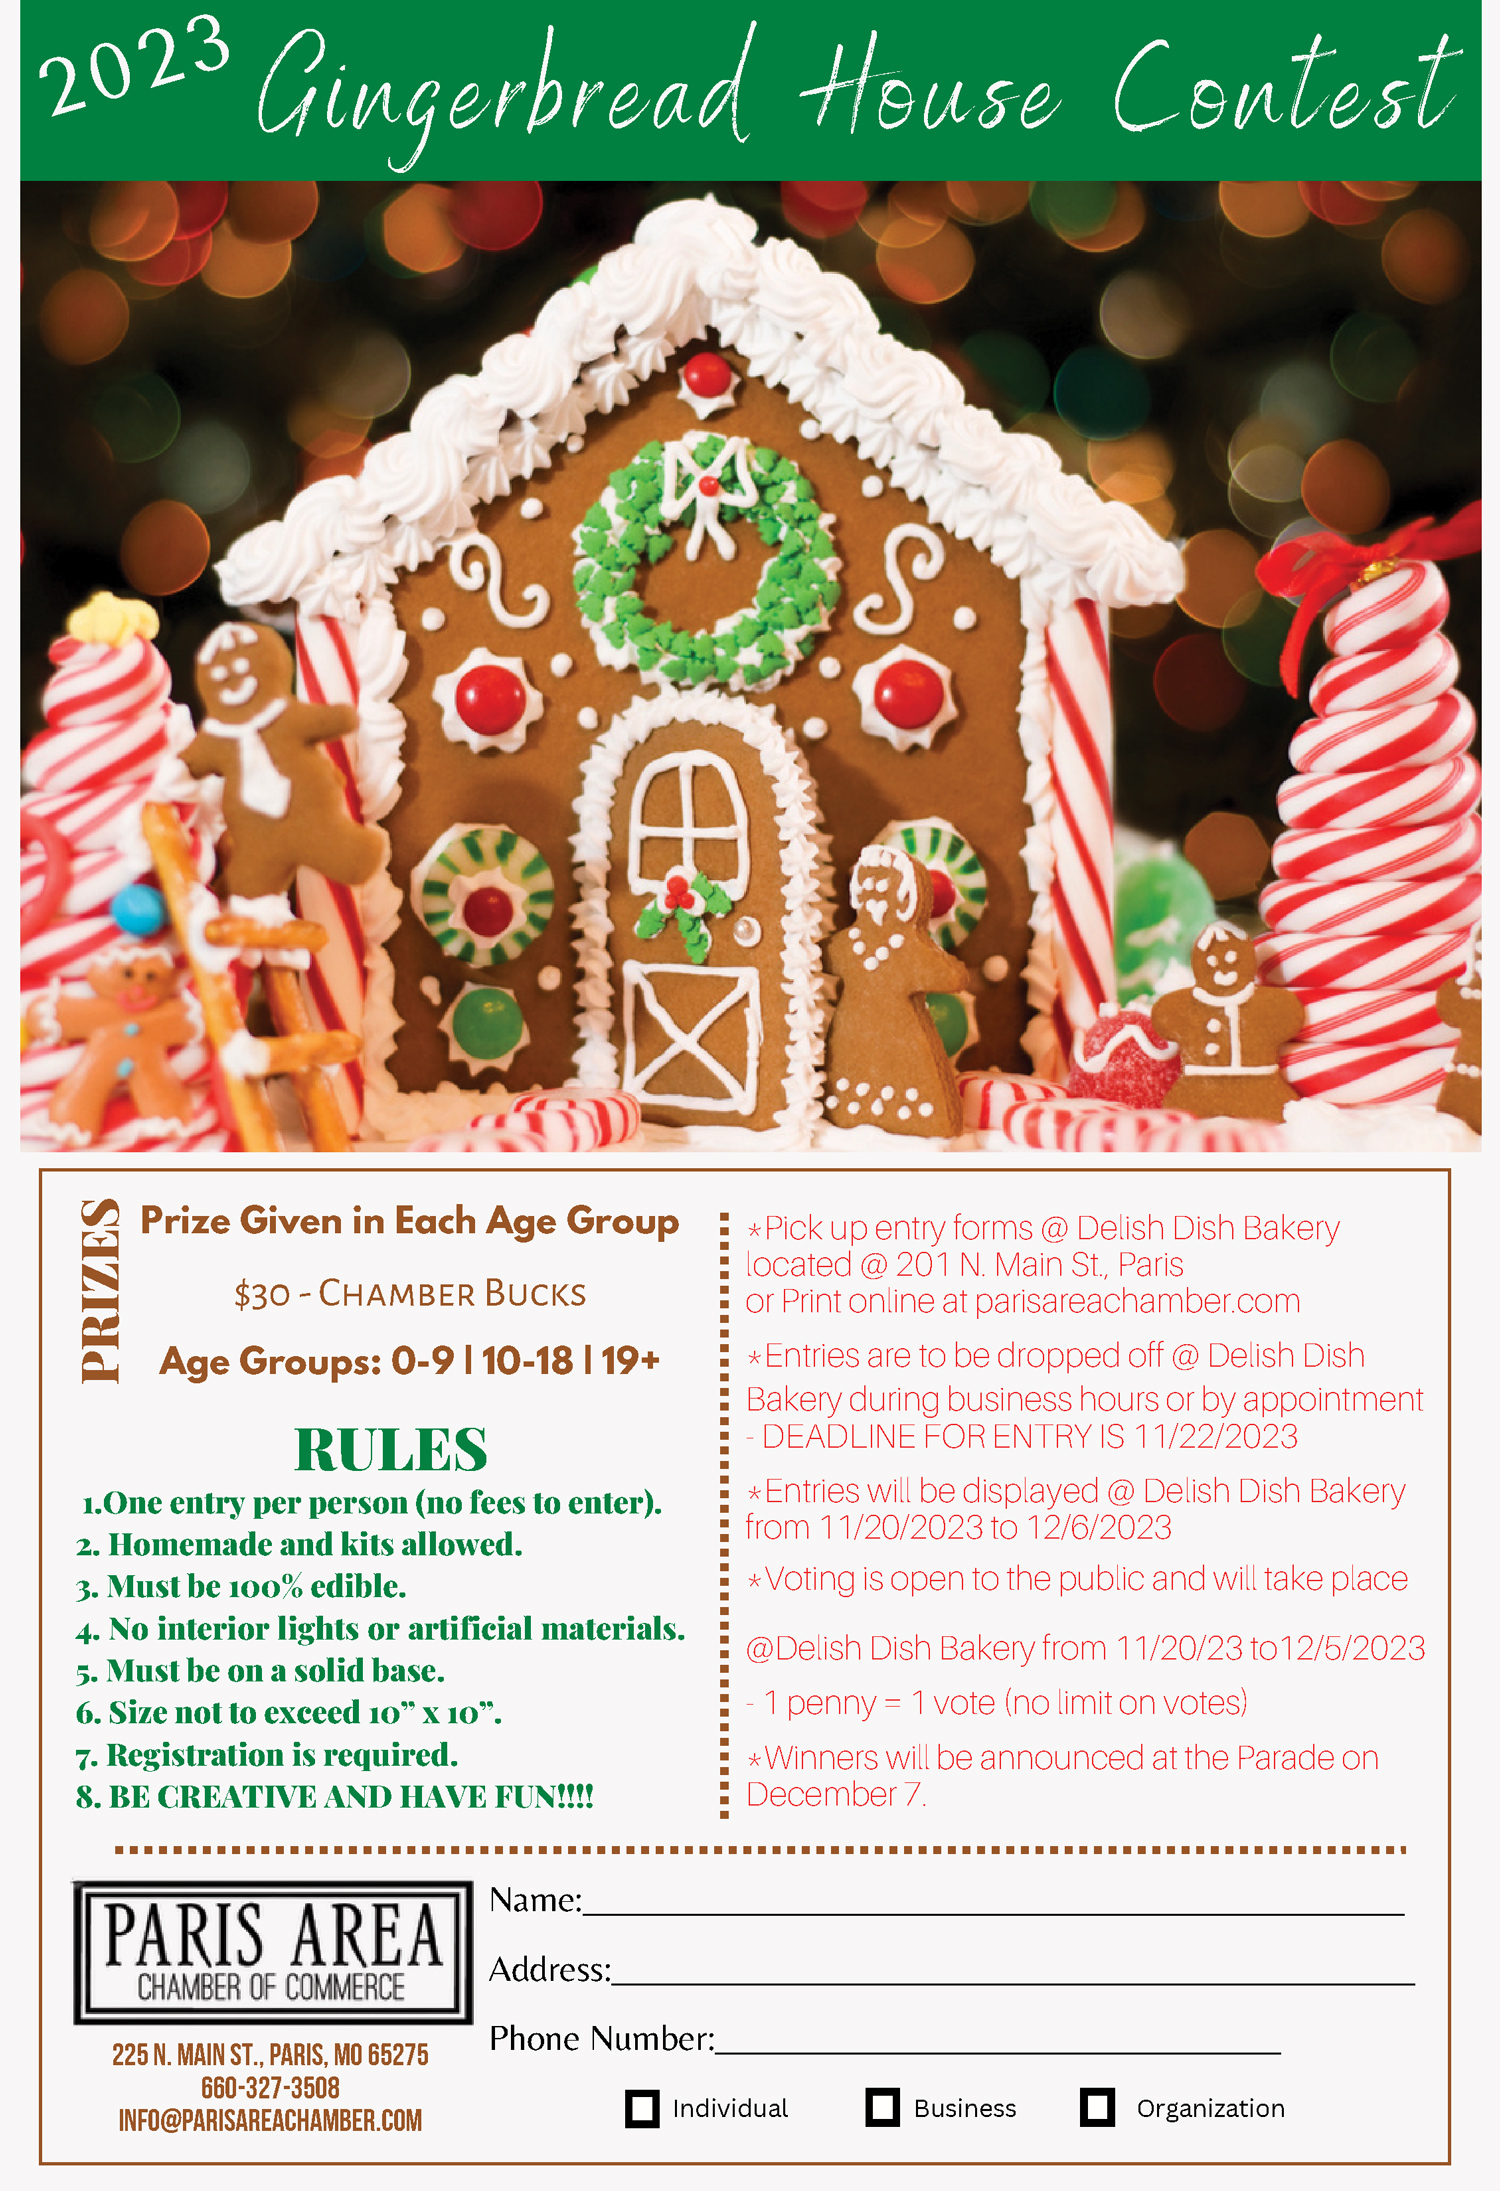 Gingerbread House Contest | Paris Area Chamber of Commerce